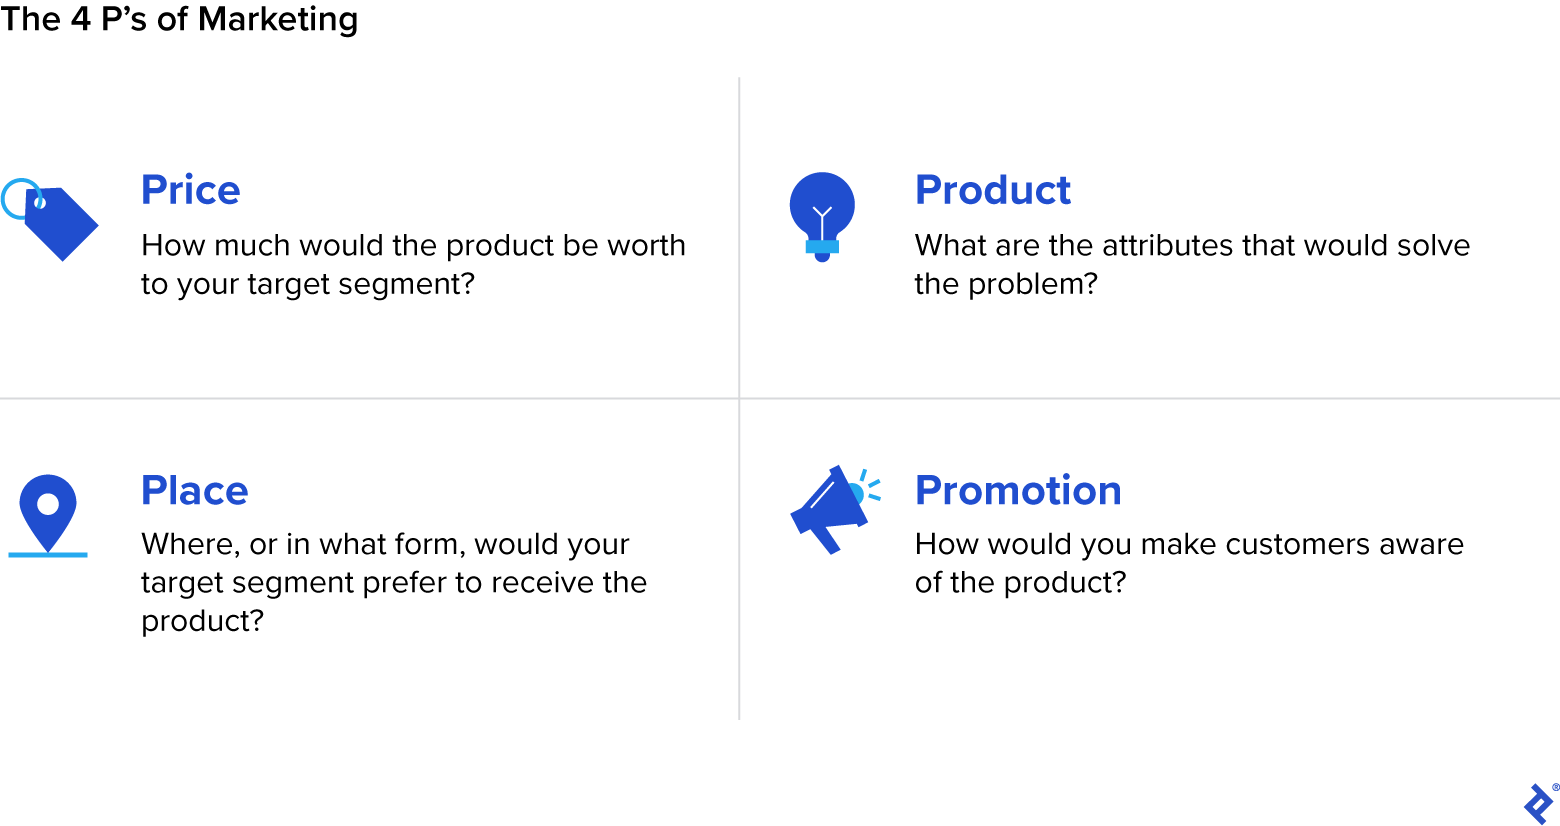 The 4 P’s of marketing: price, product, place, and promotion.